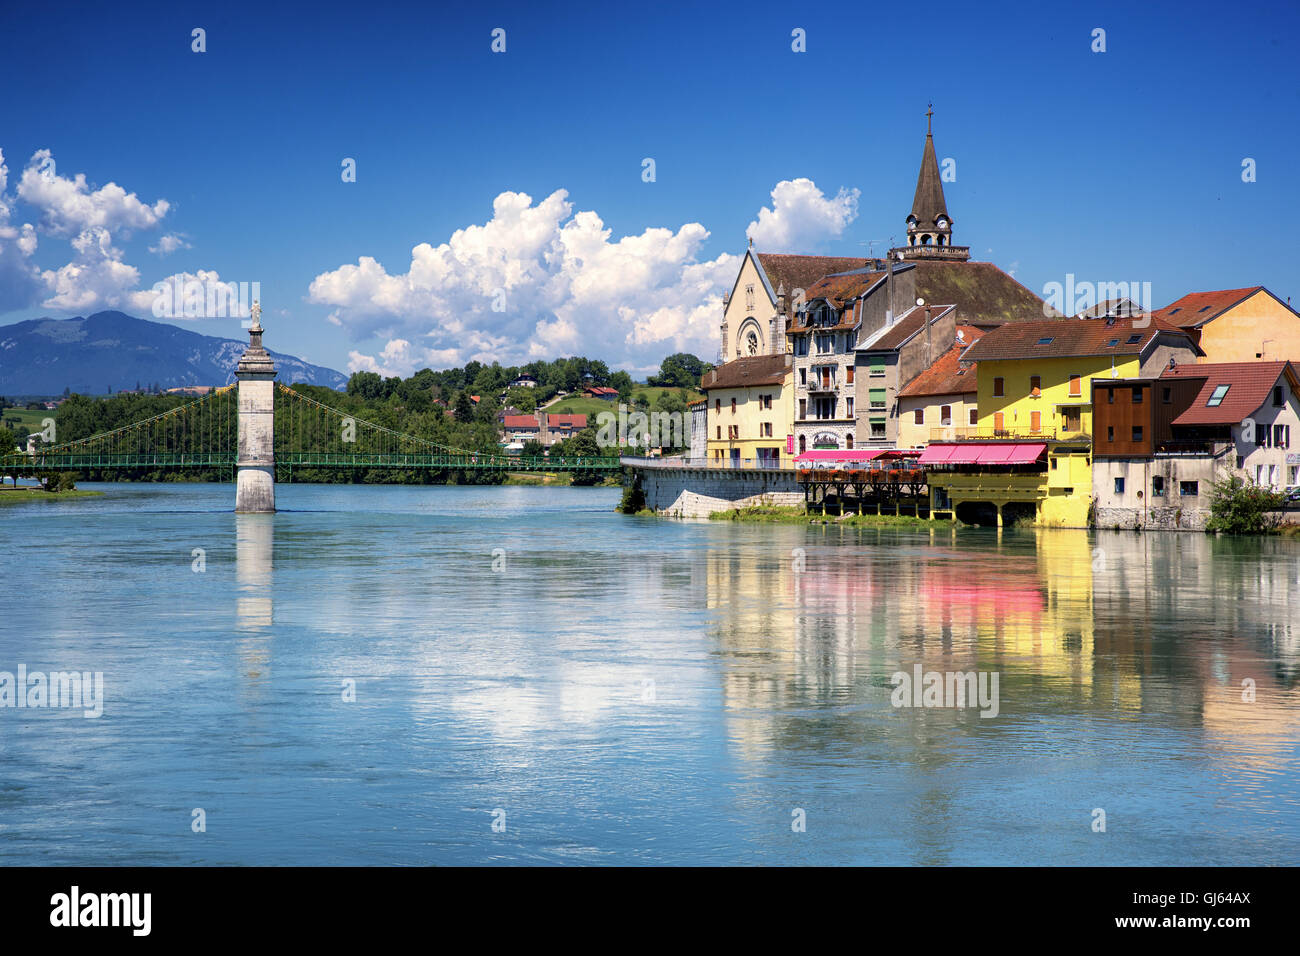 Suspended bridge above the river with a village and a church under blue sky Stock Photo